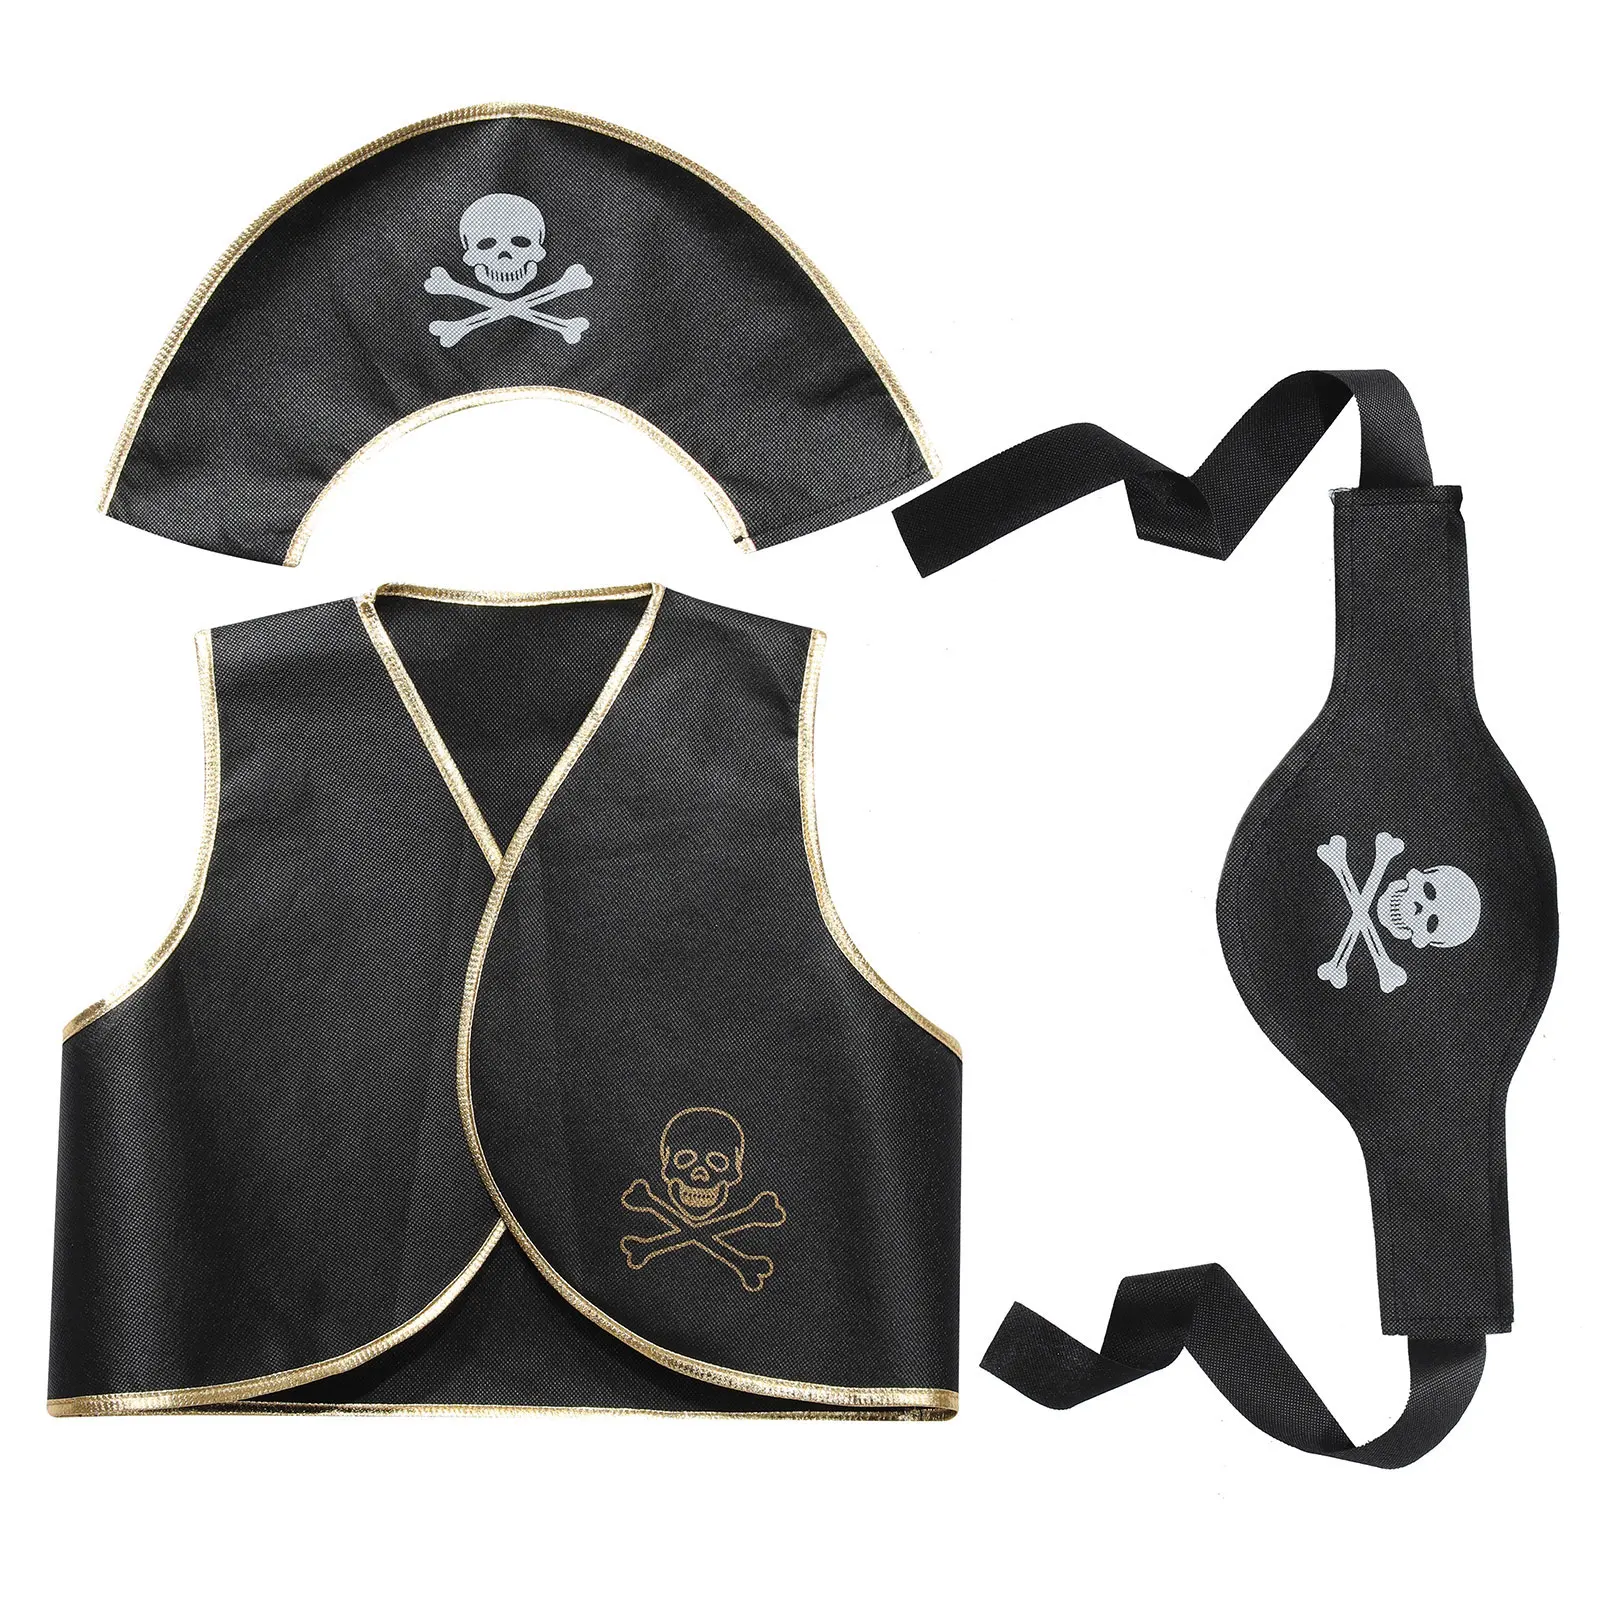 new arrival halloween accessories skull hat caribbean pirate hat piracy hats corsair cap party props cosplay costume theater toy Kids Halloween Pirate Jack Captain Cosplay Costume Skull Print Eyeshade+Vest+Hat Belt+Earring Set Theme Party Dress Up Props